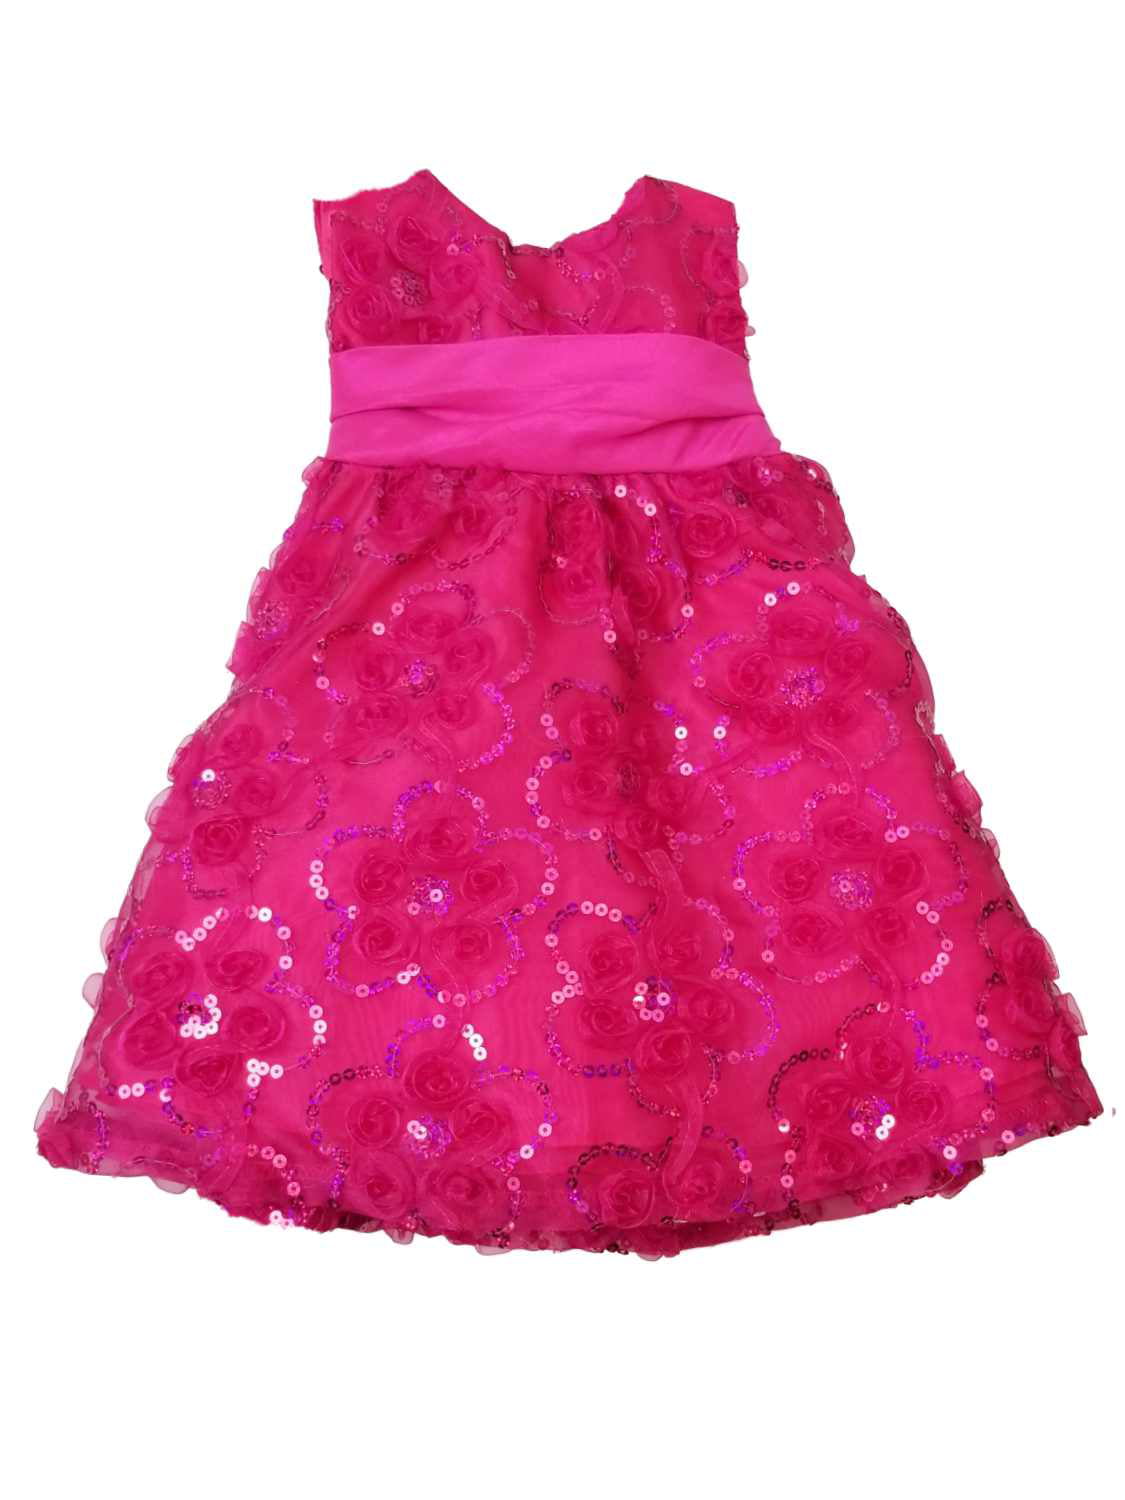 Girls Pink Velvet Dress Birthday Girl Dress New Collection by PetitWild Party Girl Dress Christmas New Year Dresses Holiday Girl Dress